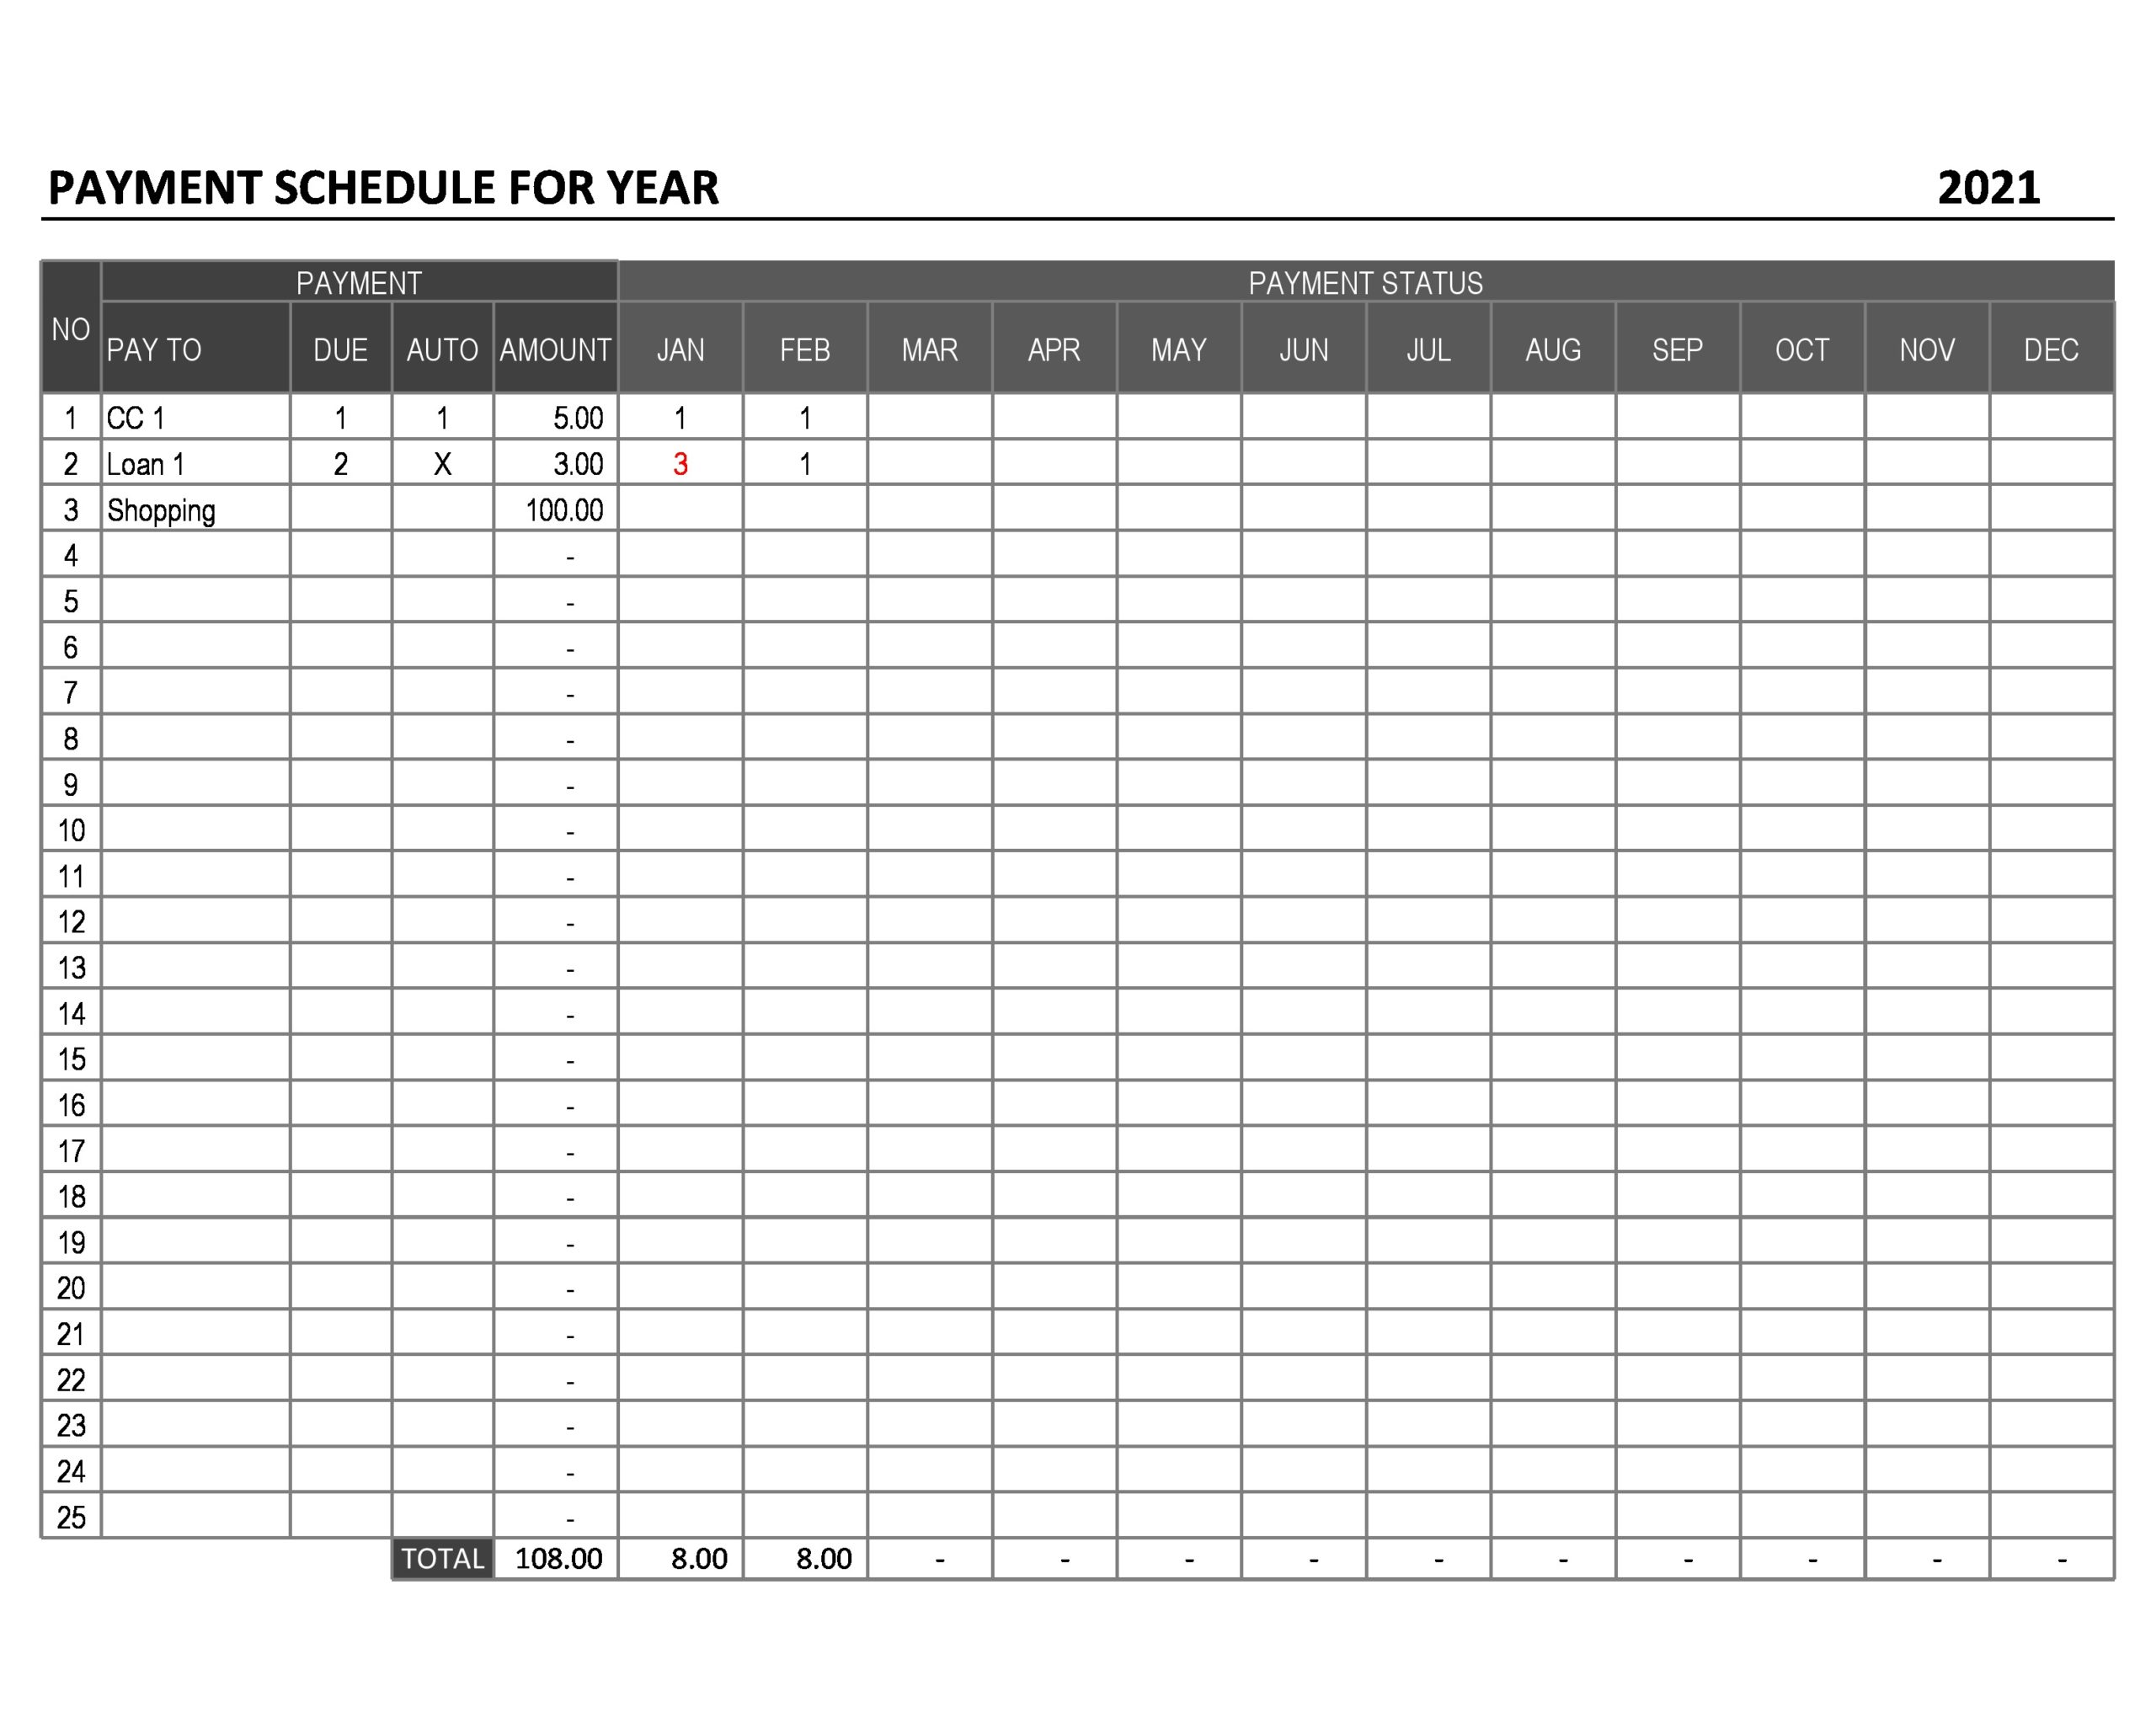 49 Free Payment Schedule Templates [Excel, Word] ᐅ TemplateLab